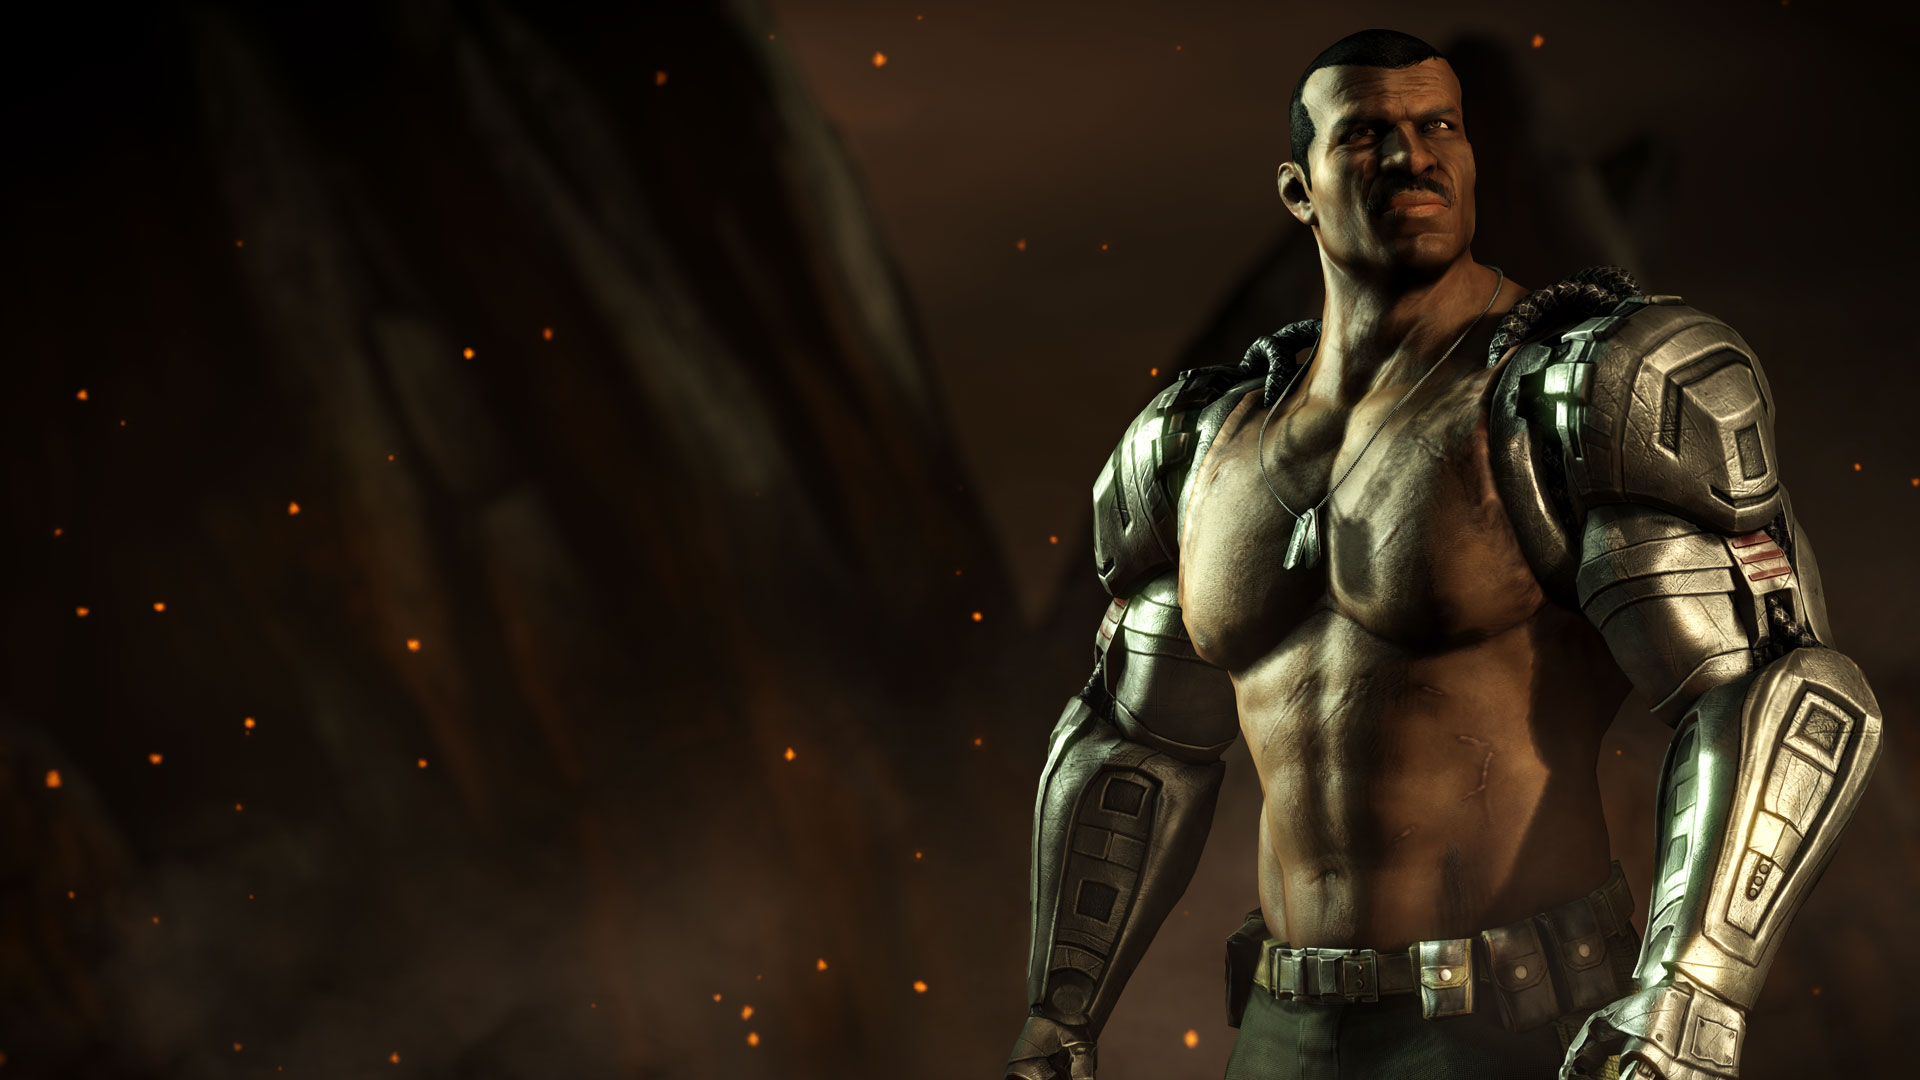 Mortal kombat x is getting released on the 14th april 2015 for the playstat...